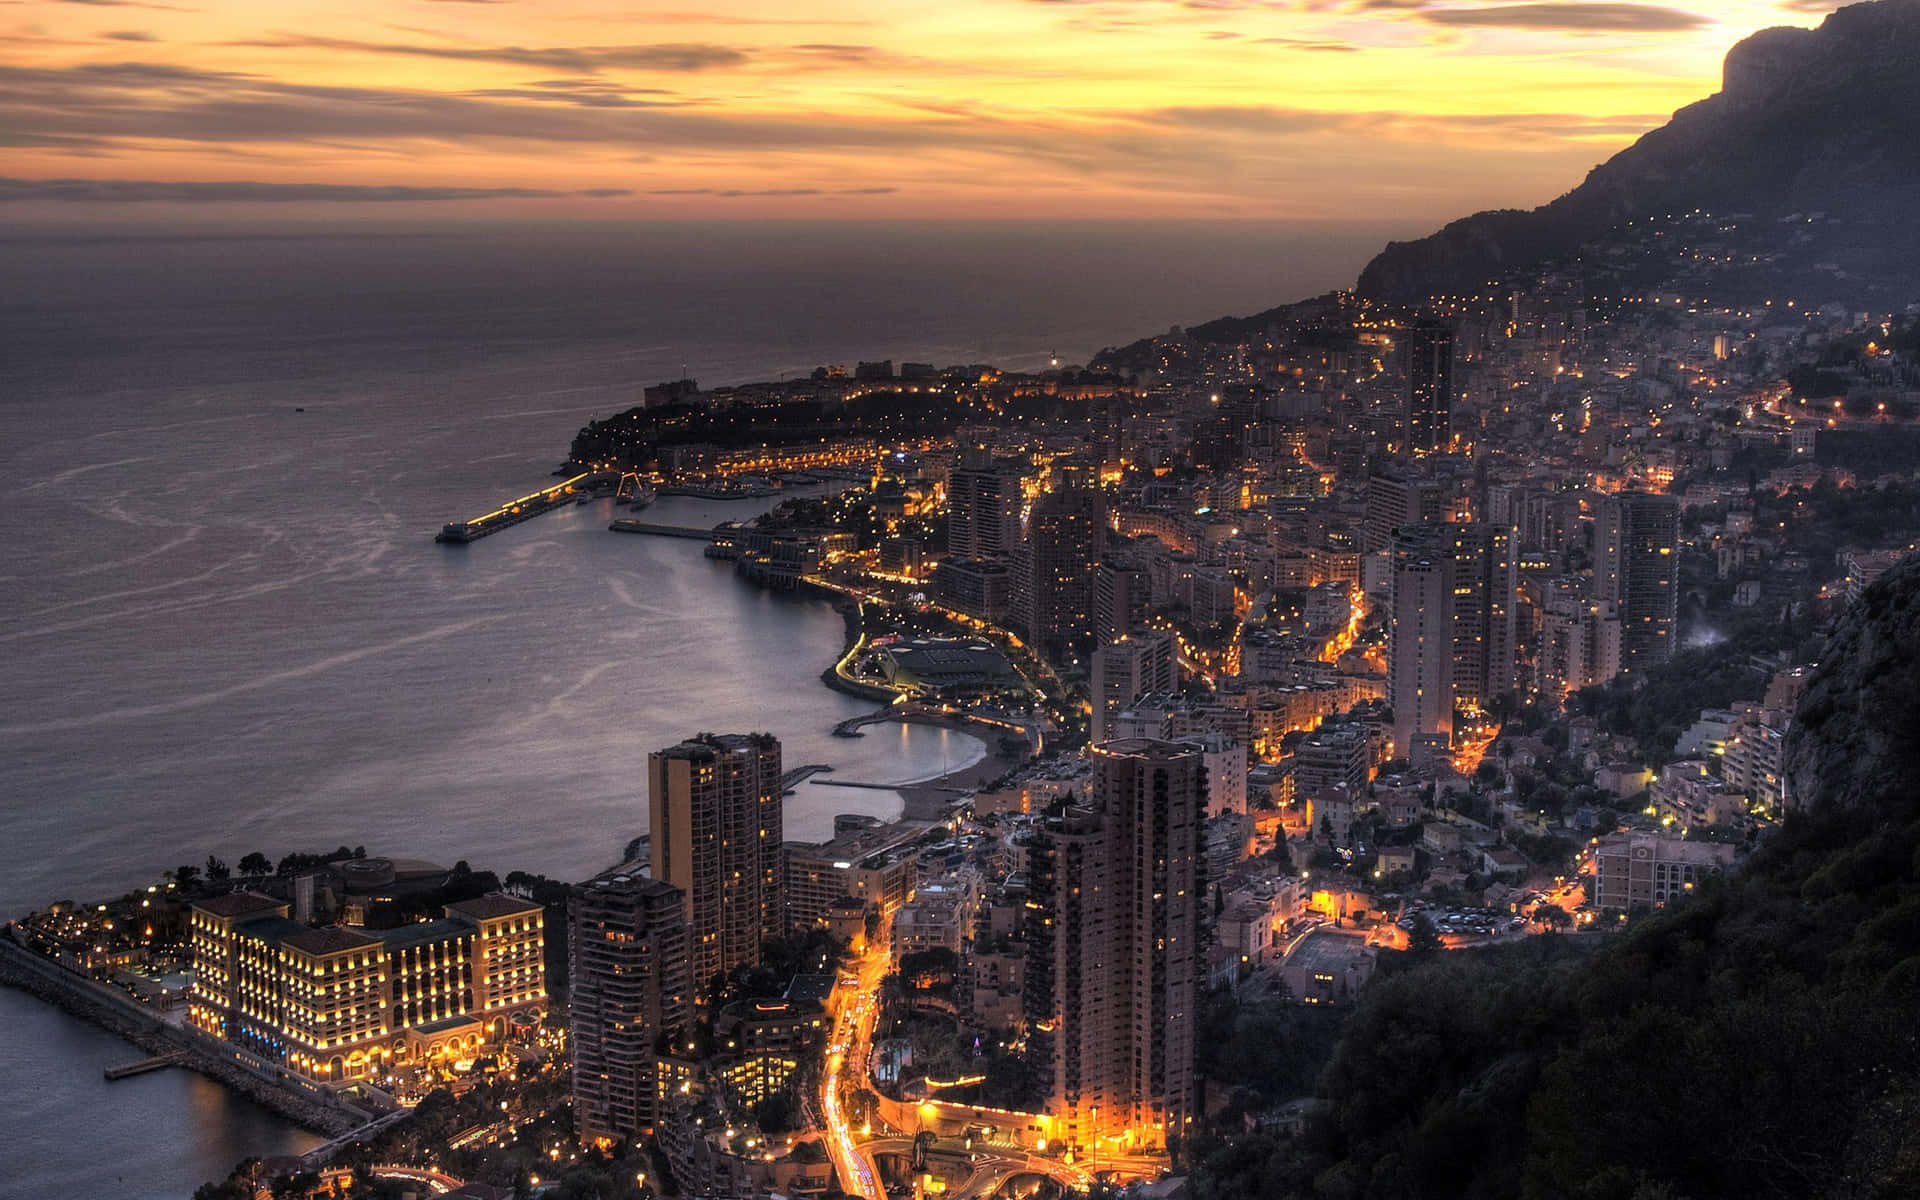 A Staggering View Of The Monaco Landscape During Twilight